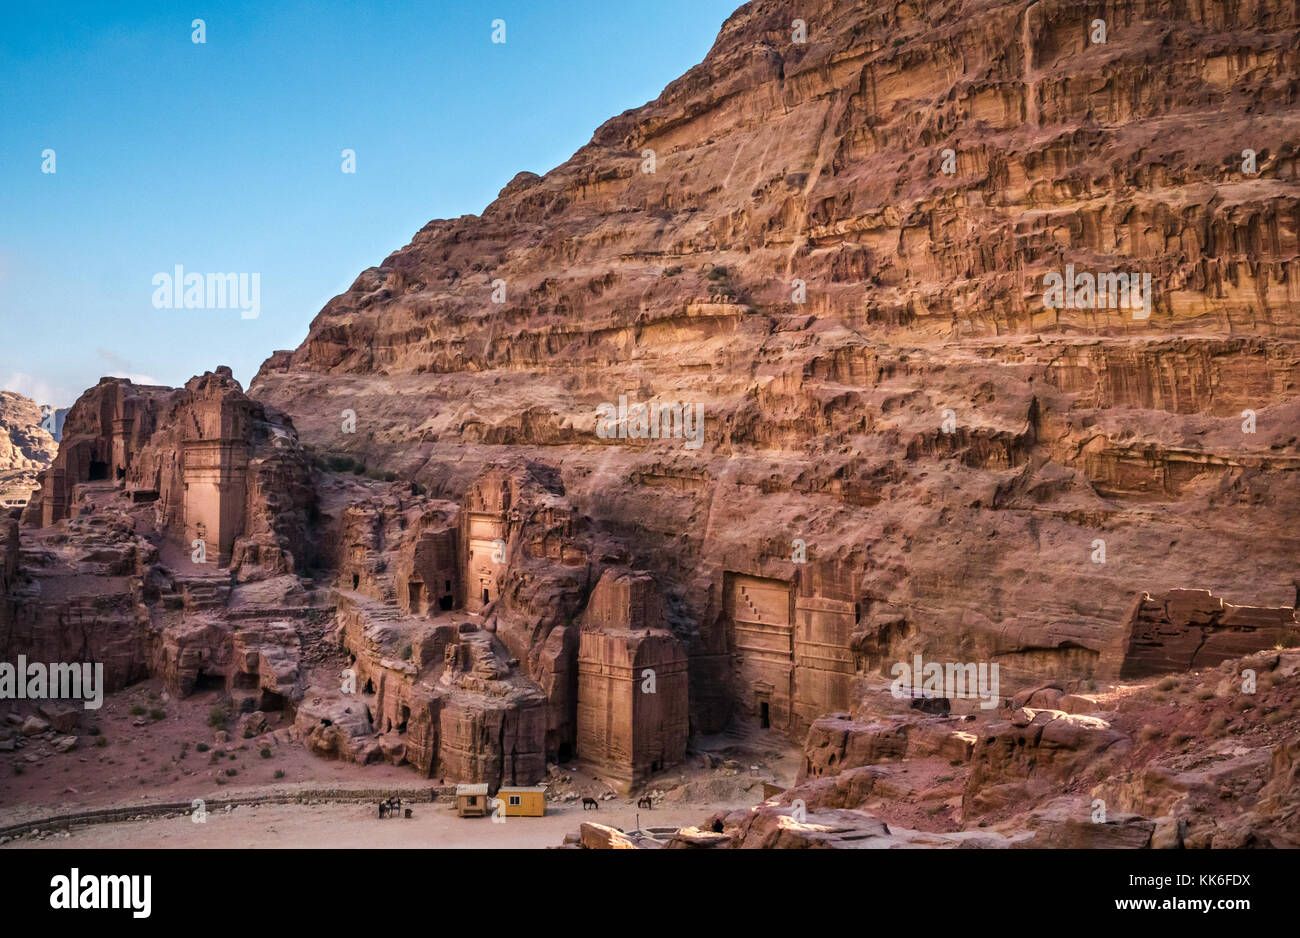 View looking down from above at High Place of Sacrifice to Nabataean sandstone Royal Tombs, Petra, Jordan, Middle East Stock Photo